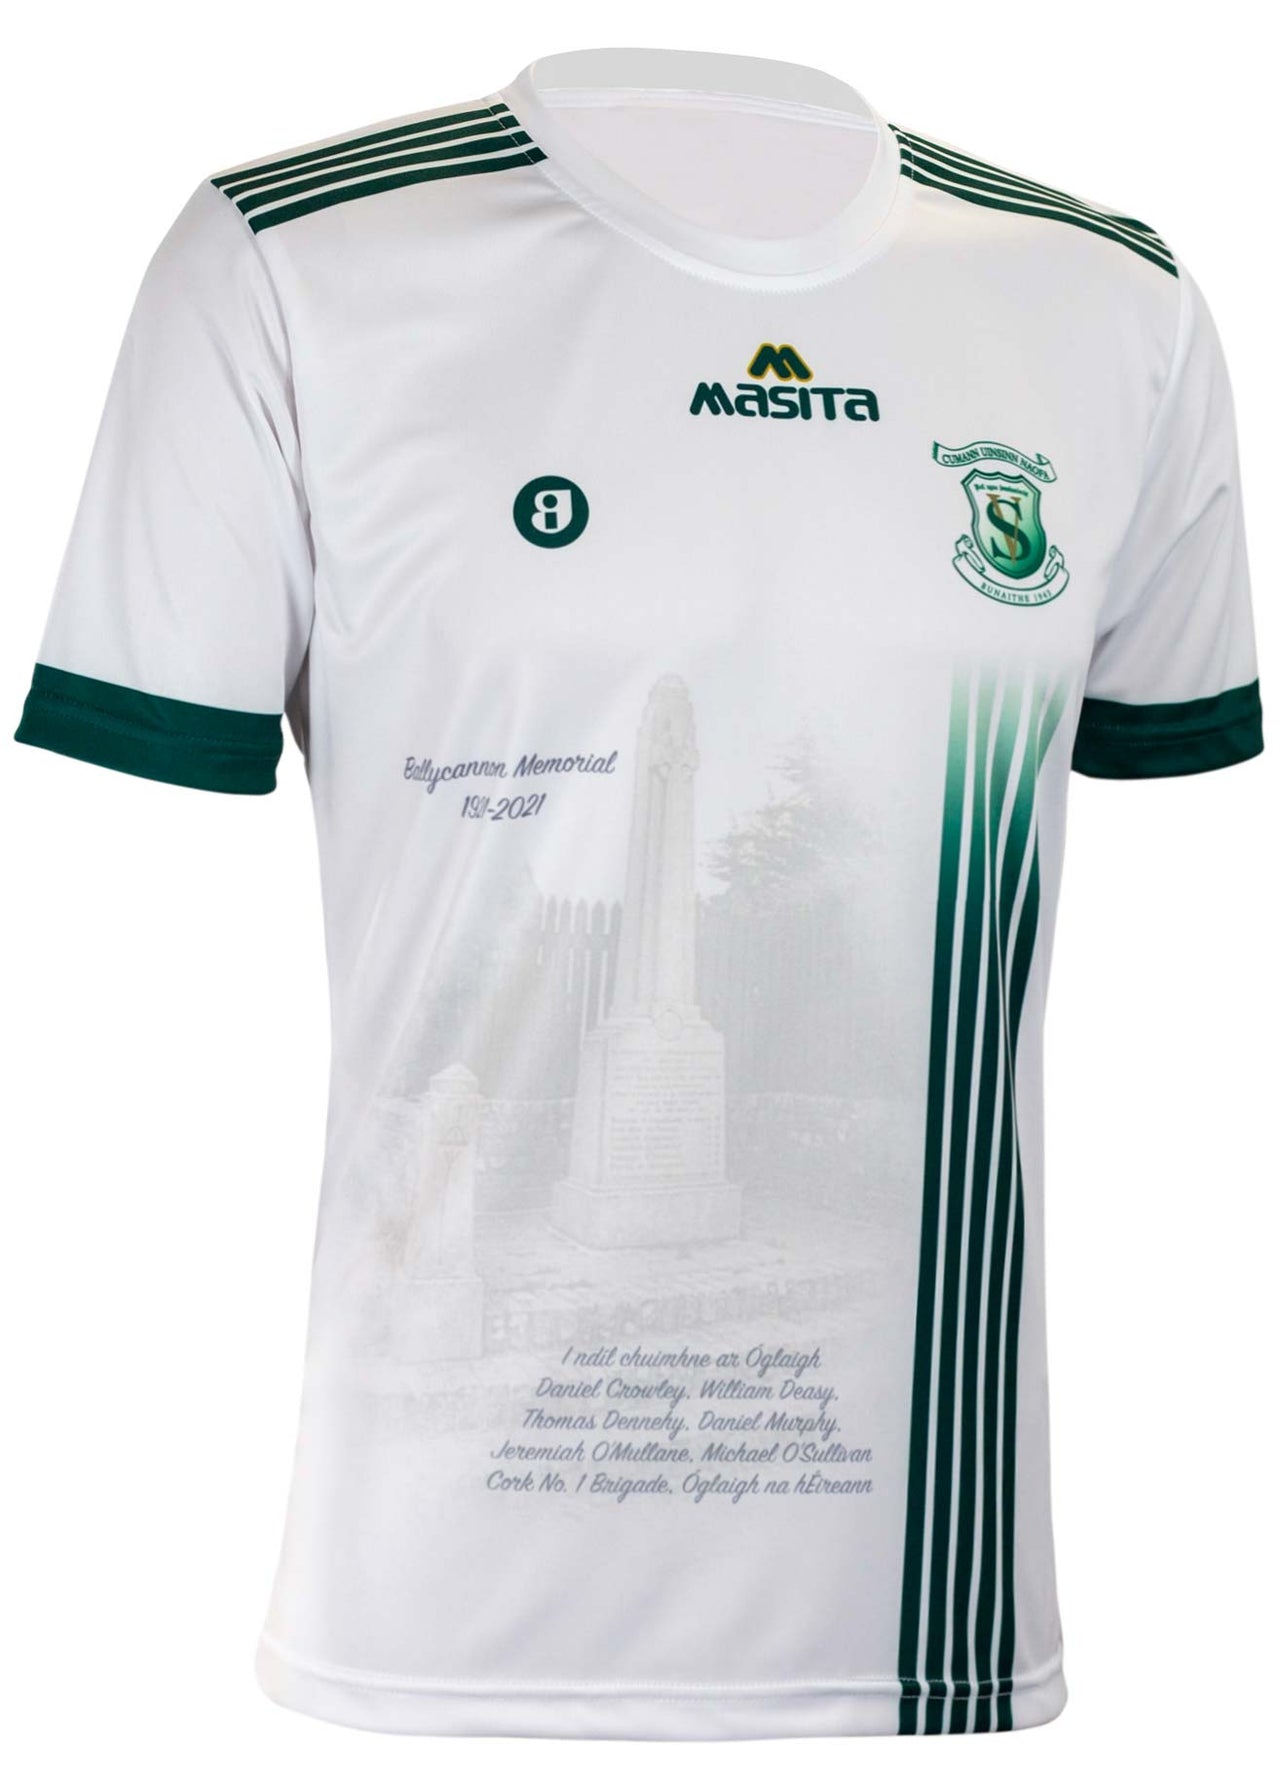 St Vincent's White Commemorative Jersey Player Fit Adult